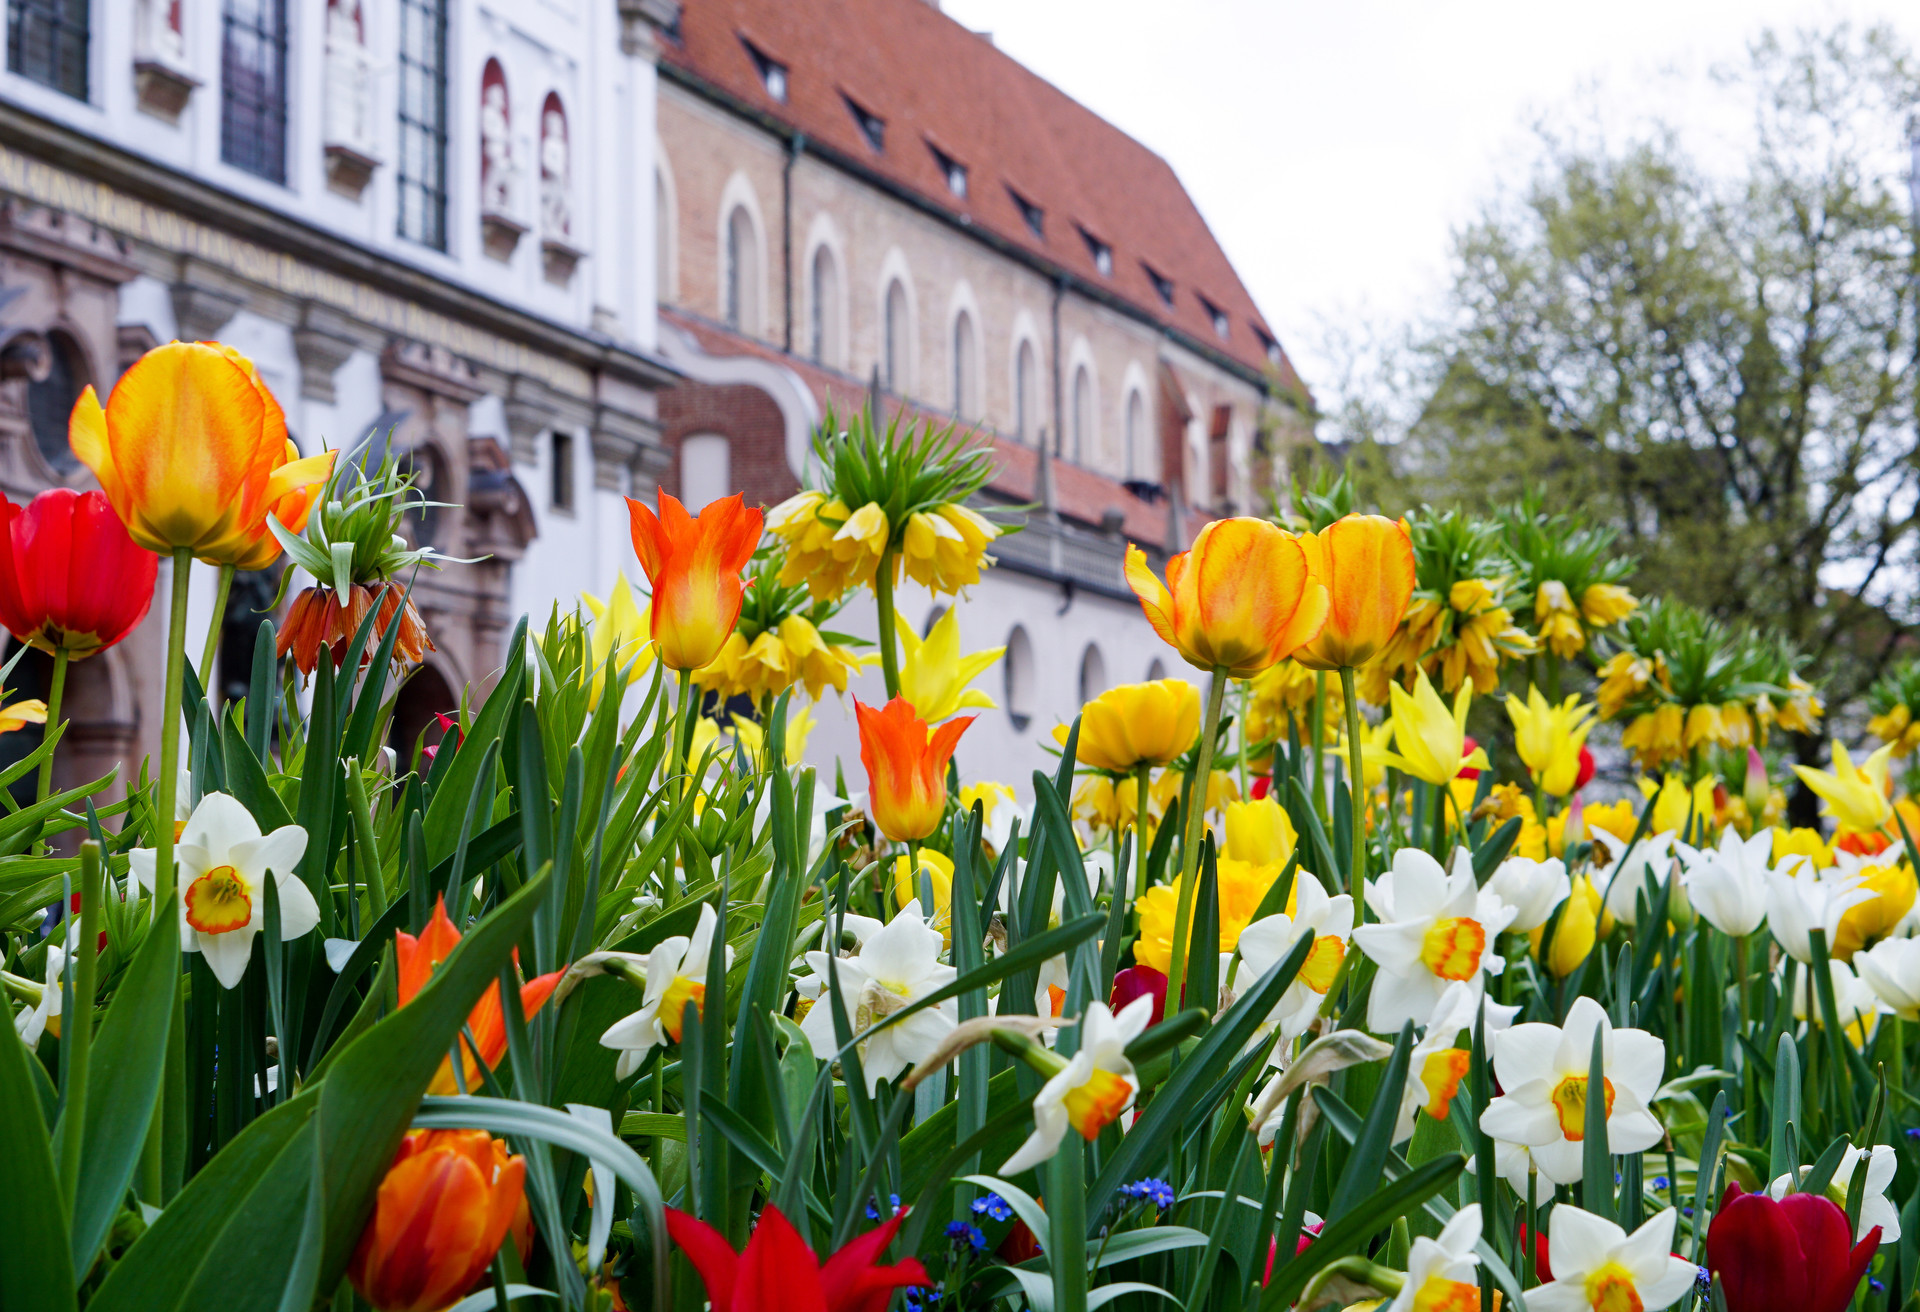 Colorful flowers blooming at the old town center of Munich, Germany; Shutterstock ID 1131749585; Purpose: Product; Brand (KAYAK, Momondo, Any): Any